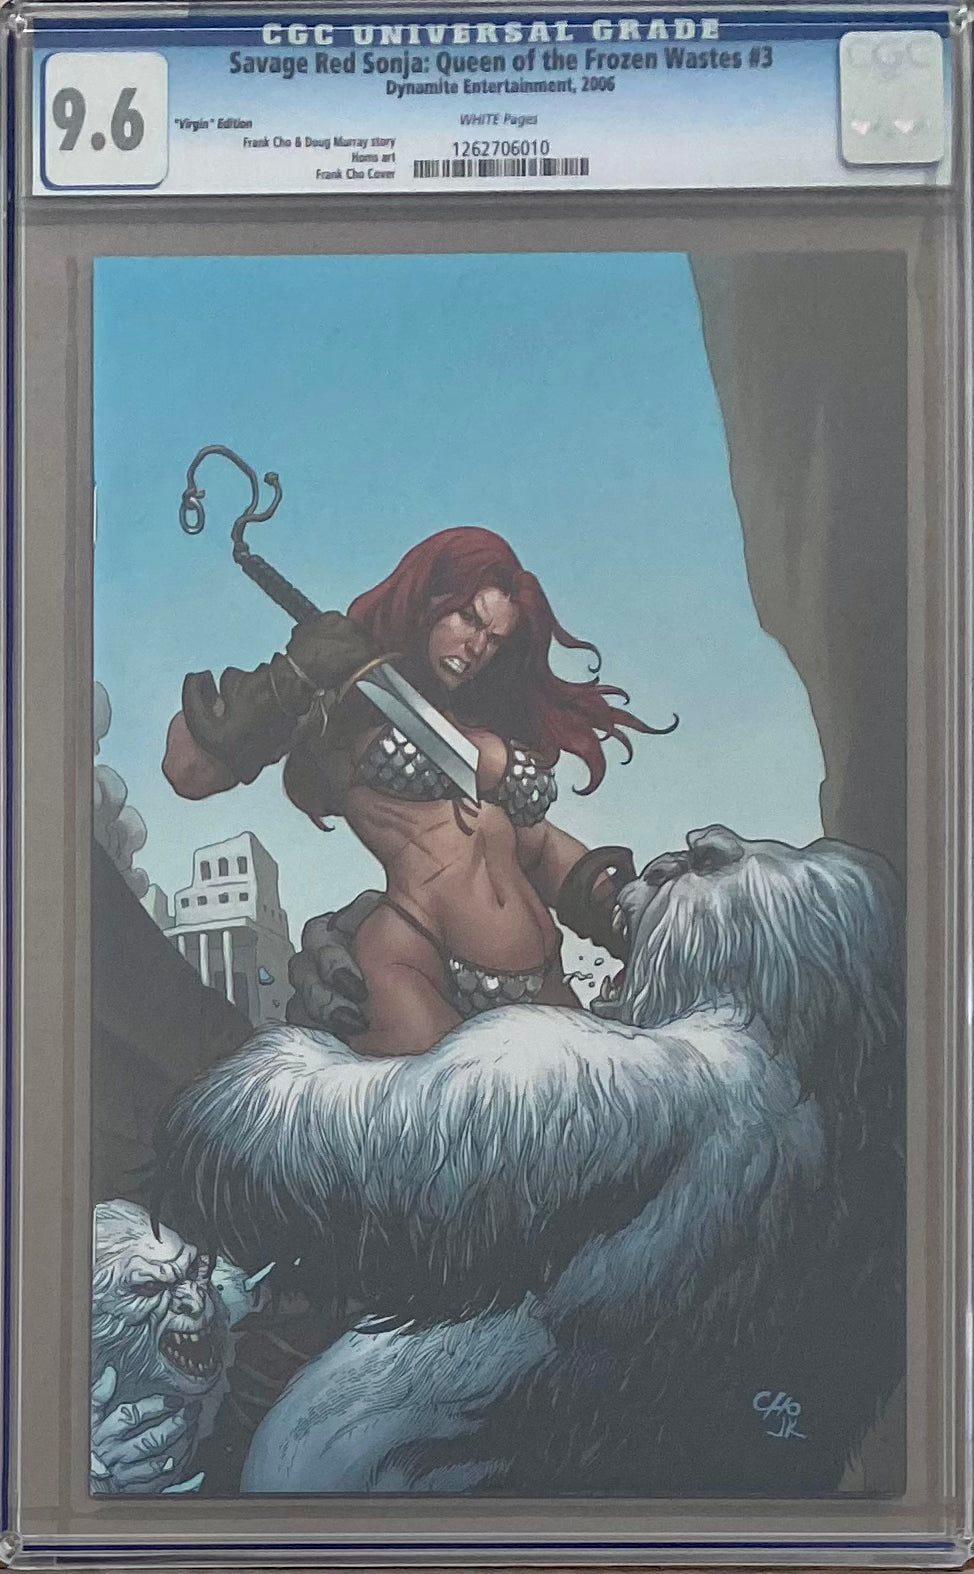 Savage Red Sonja: Queen of the Frozen Wastes #3 Virgin Edition CGC 9.6